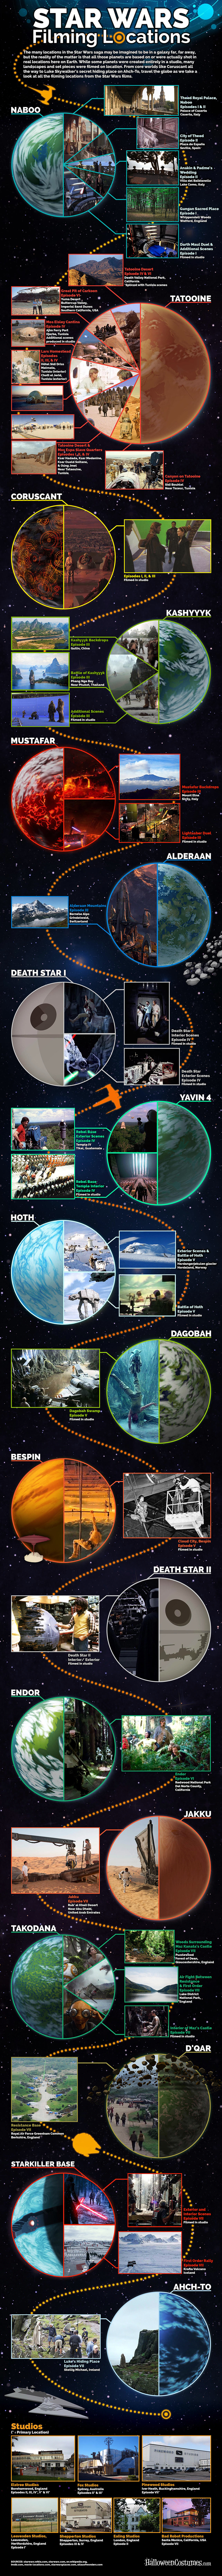 Star Wars Filming Locations Movie infographic